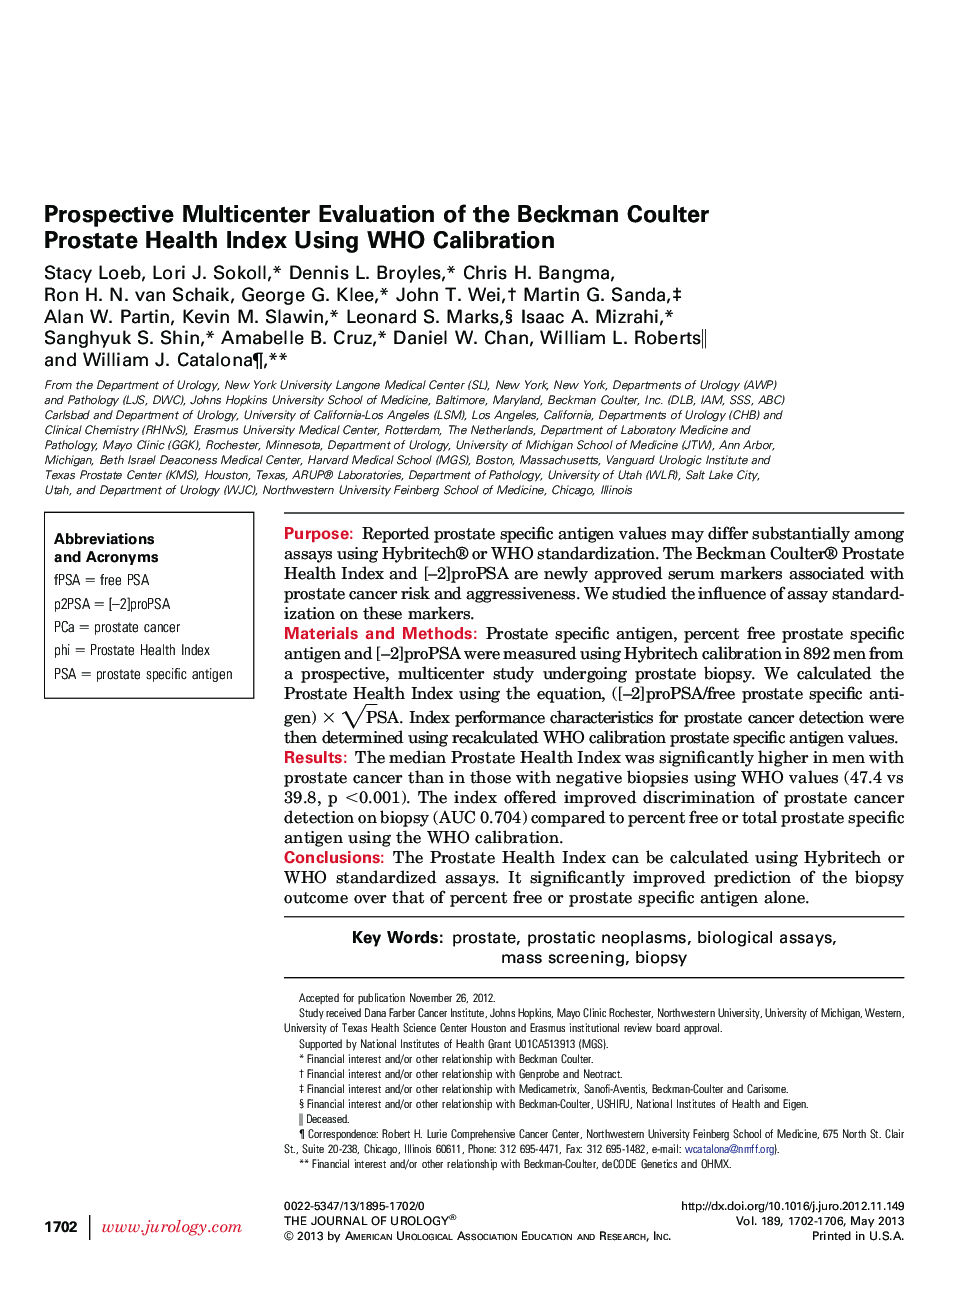 Prospective Multicenter Evaluation of the Beckman Coulter Prostate Health Index Using WHO Calibration